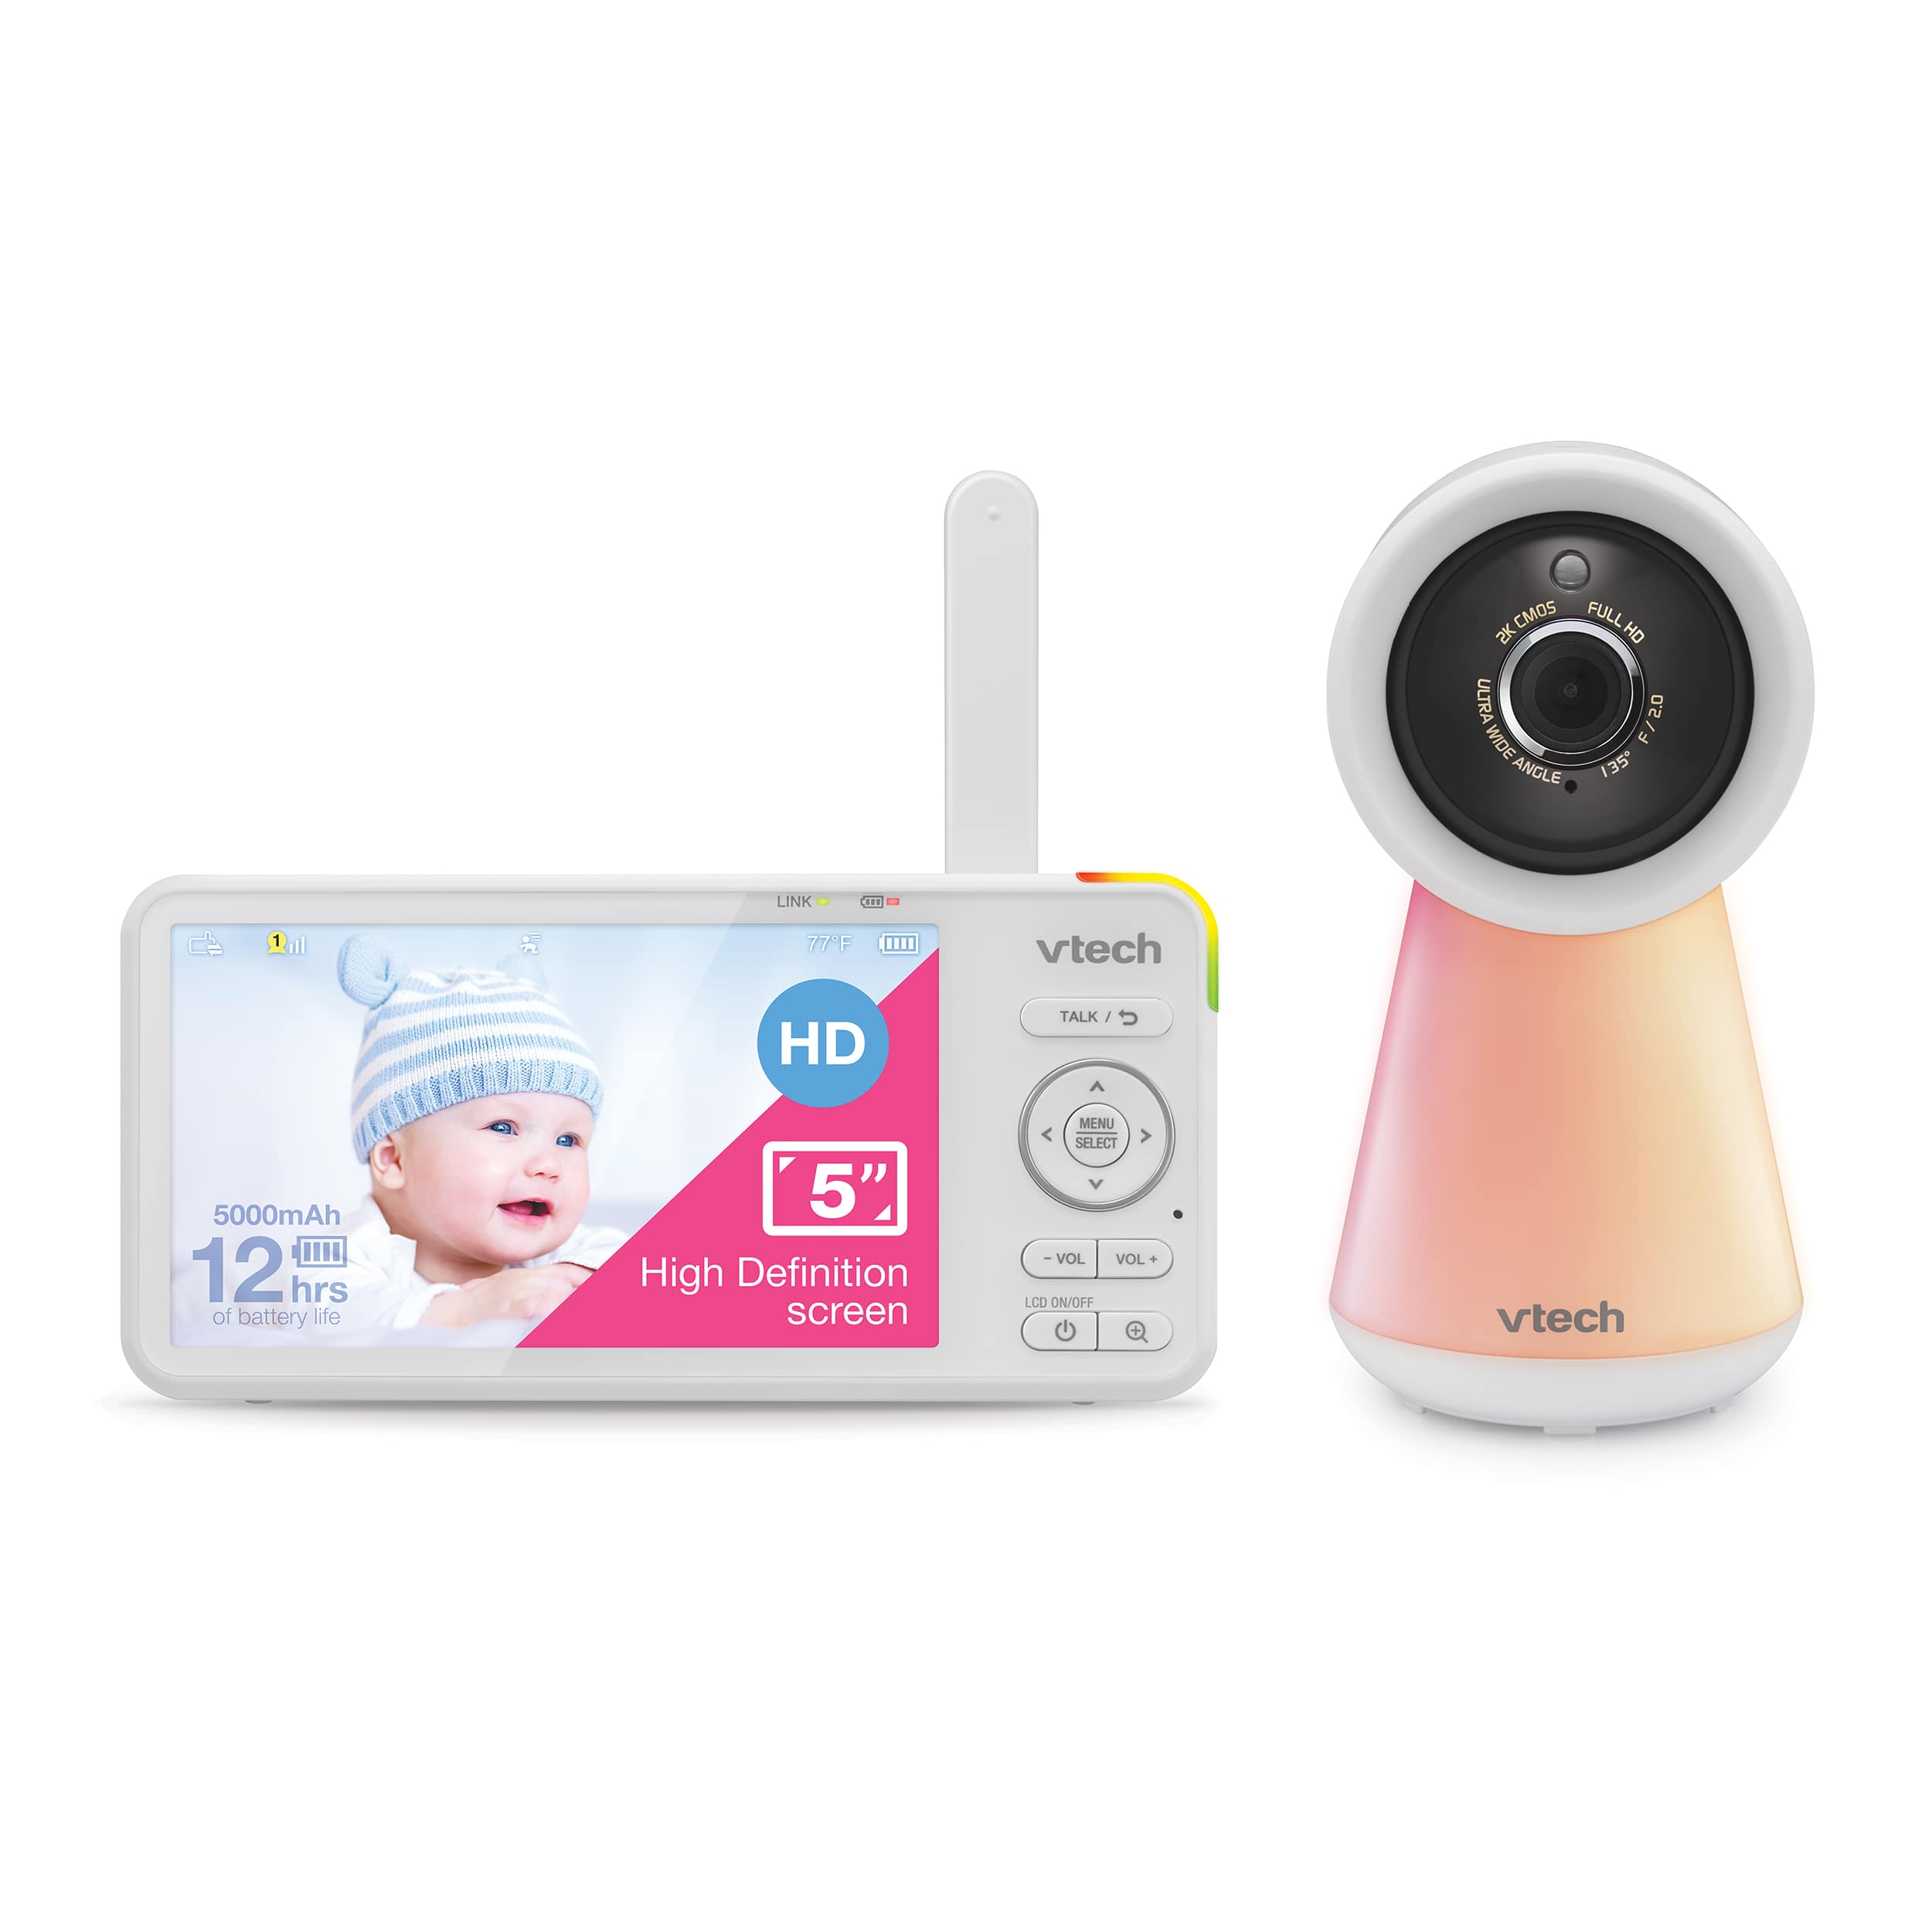 1080p Smart WiFi Remote Access Video Baby Monitor with 5” High Definition 720p Display, Night Light - view 1